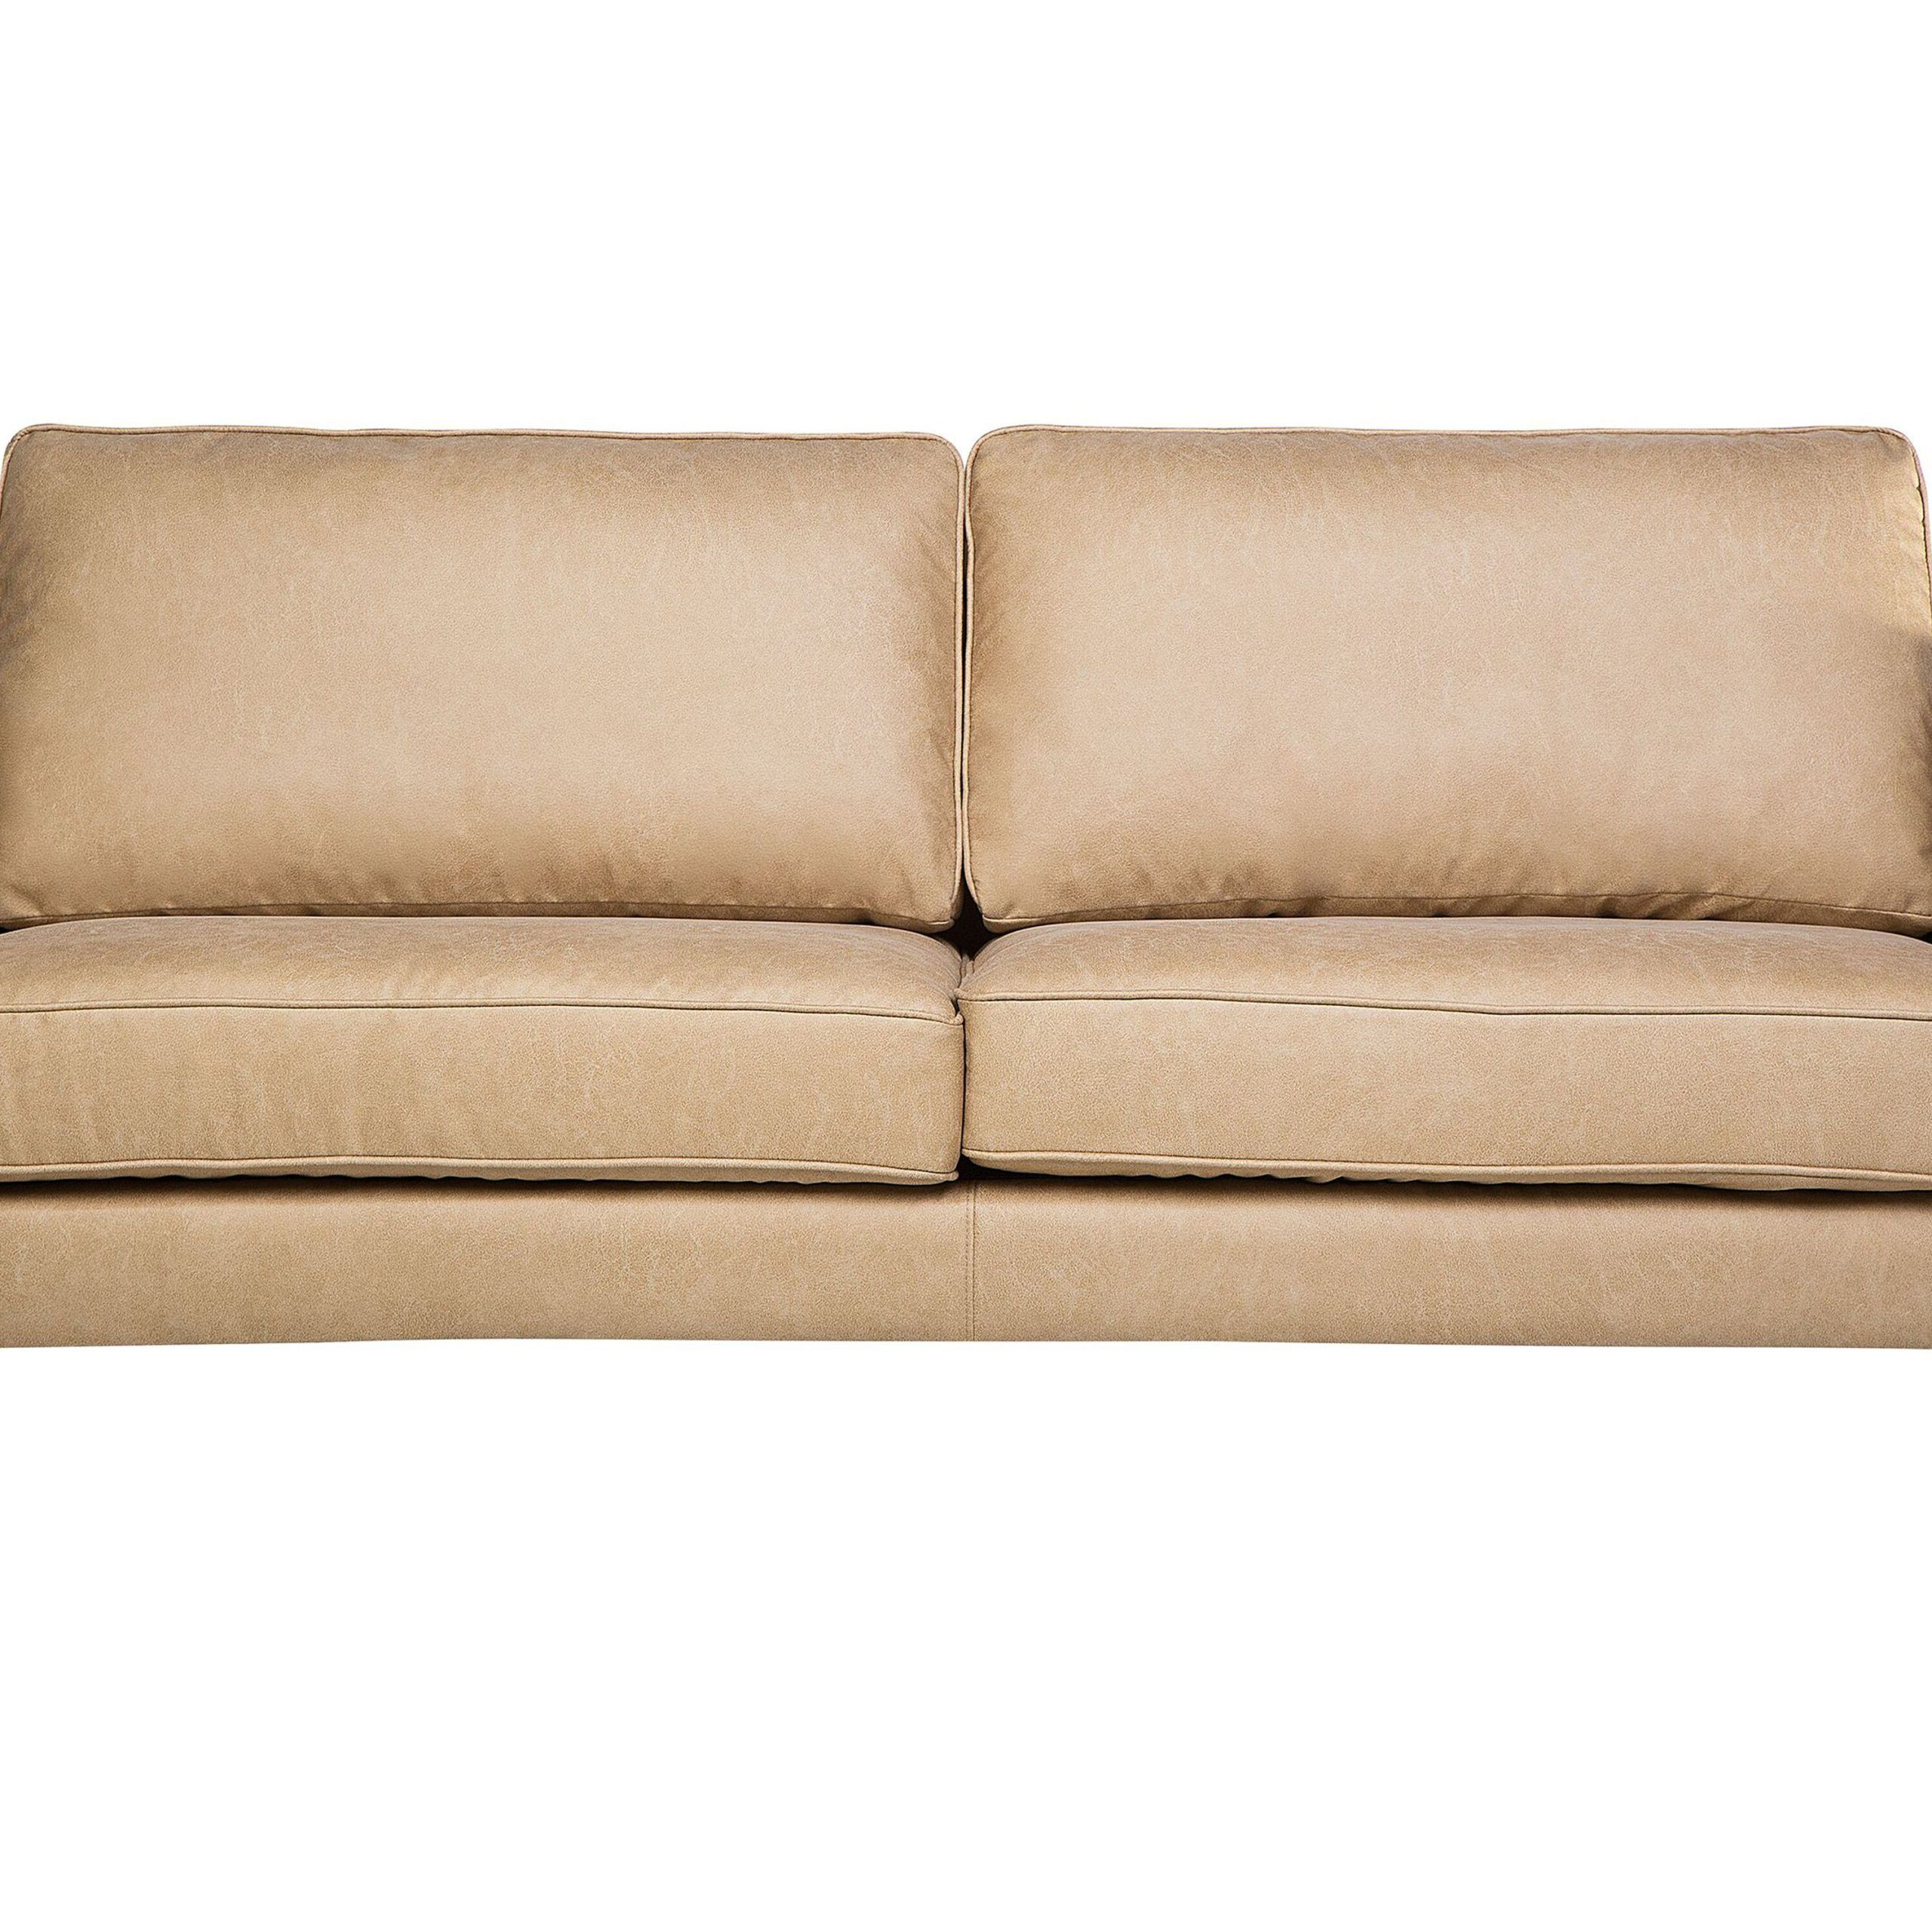 Popular Traditional 3 Seater Faux Leather Sofas Inside 3 Seater Faux Leather Sofa Beige Savalen (View 4 of 15)